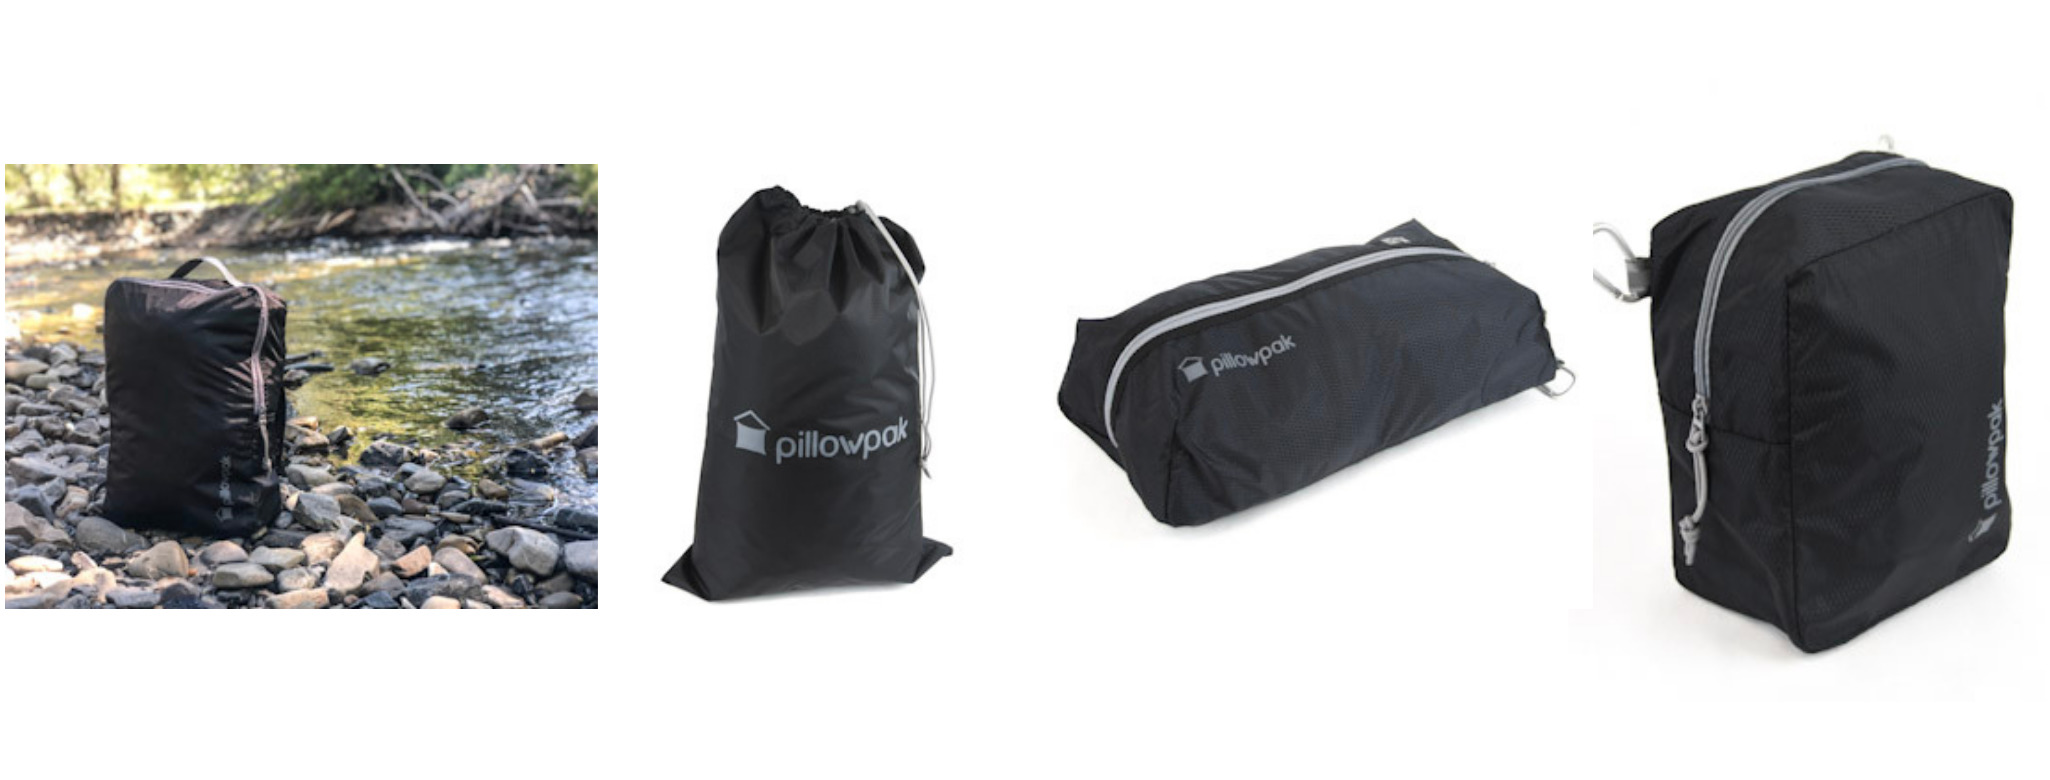 Pillowpak Assesories - the cube pack, the utility bag, the shoe bag and the packing cube.